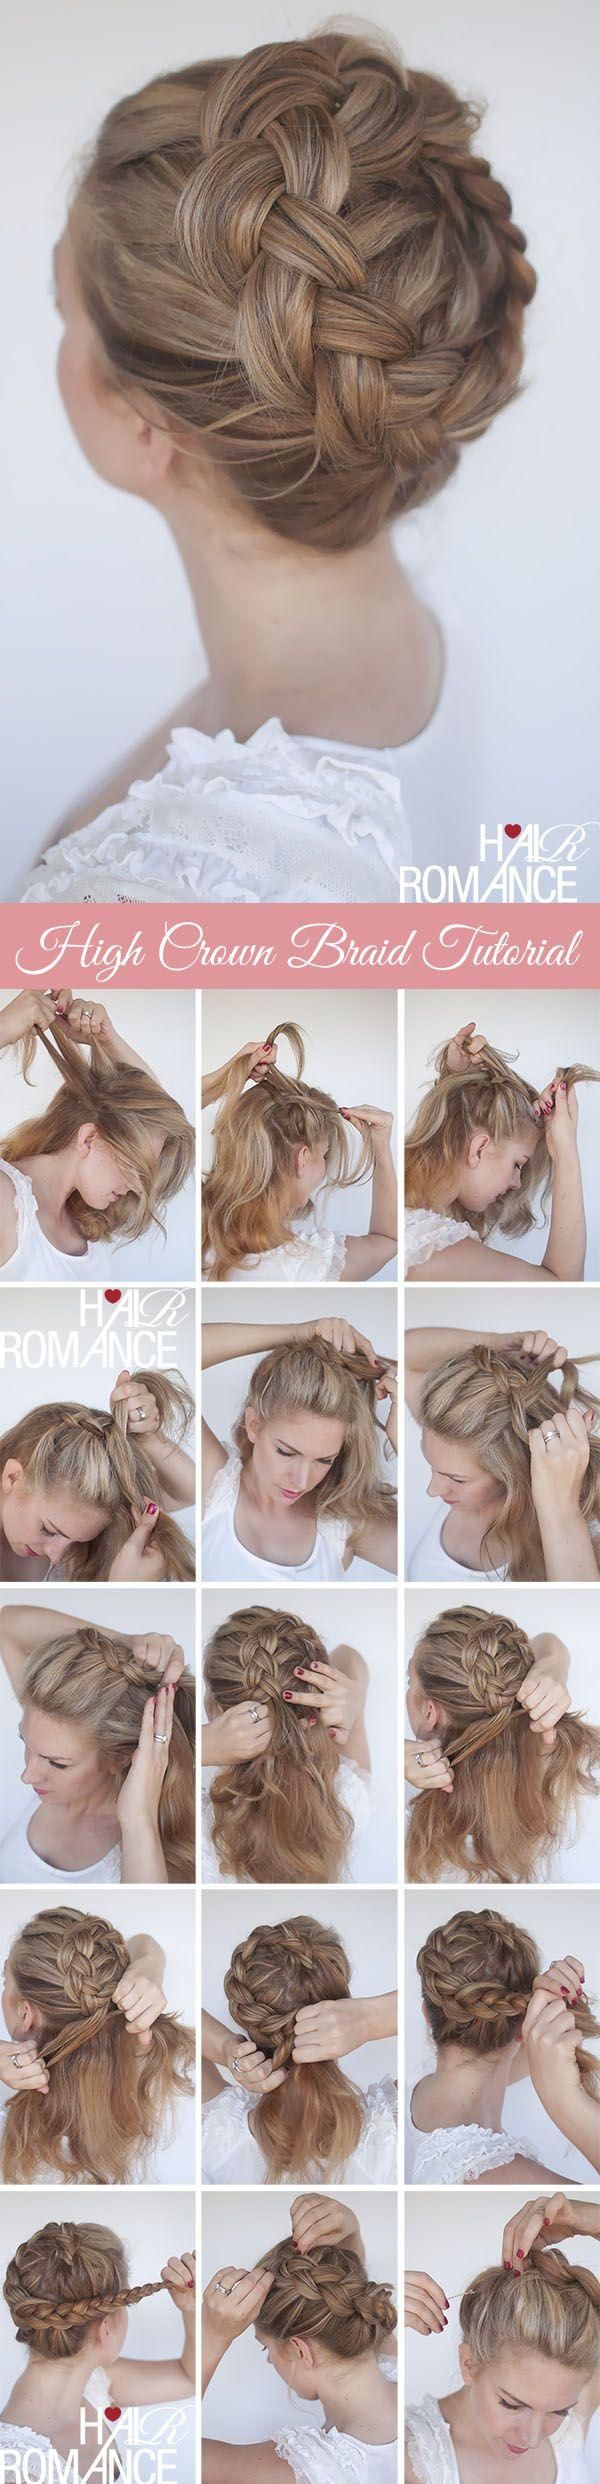 Lovely Braided Crown Hairstyle Tutorial